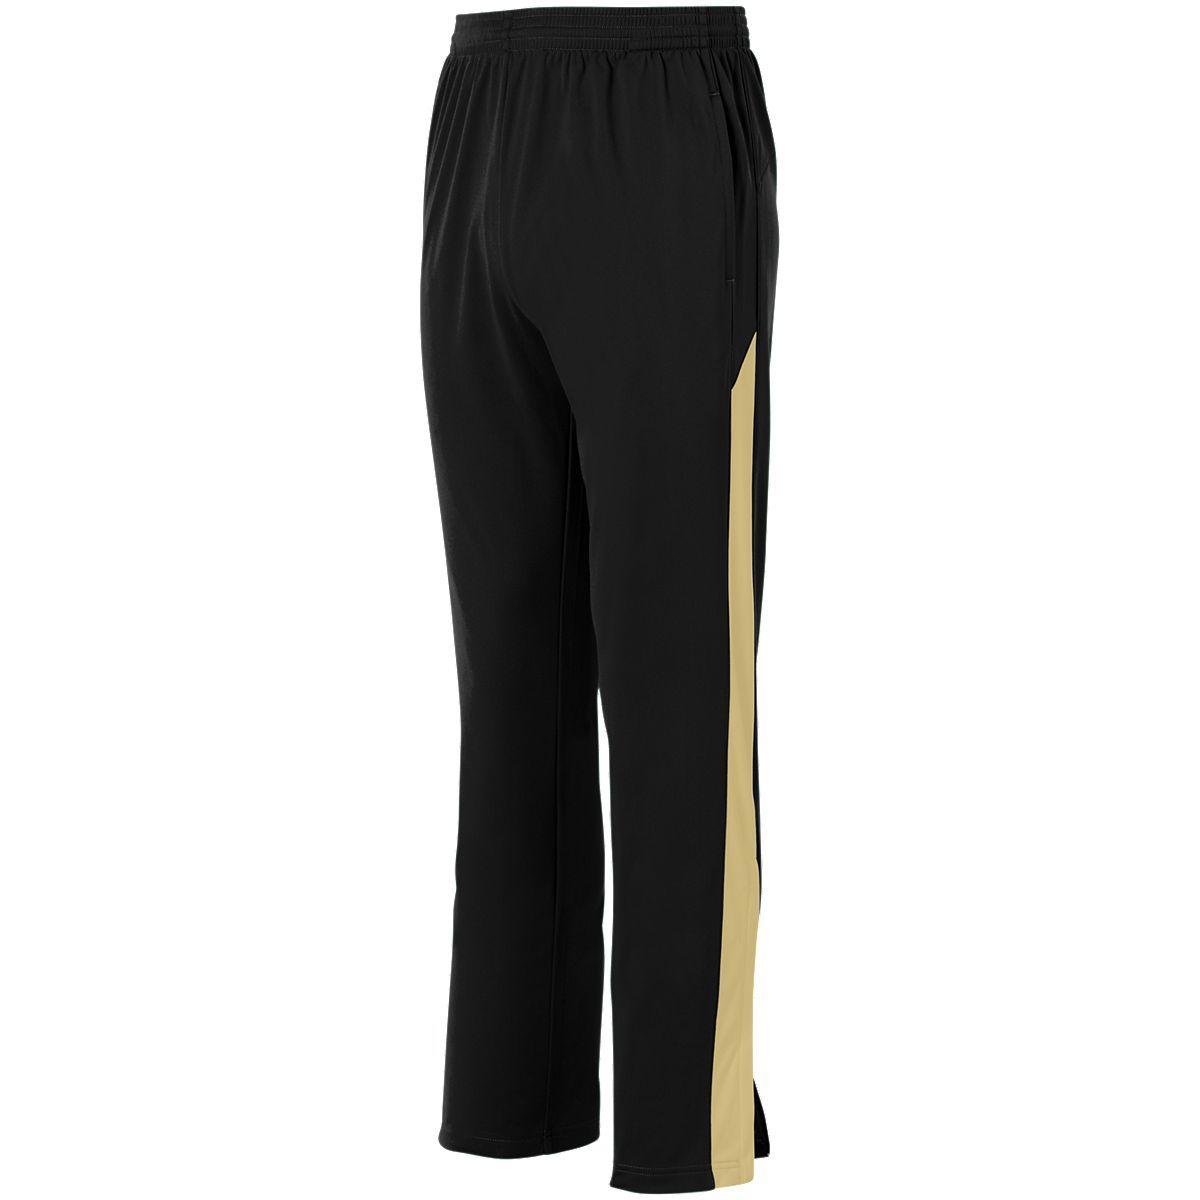 Augusta Sportswear Medalist Pant 2.0 in Black/Vegas Gold  -Part of the Adult, Adult-Pants, Pants, Augusta-Products product lines at KanaleyCreations.com